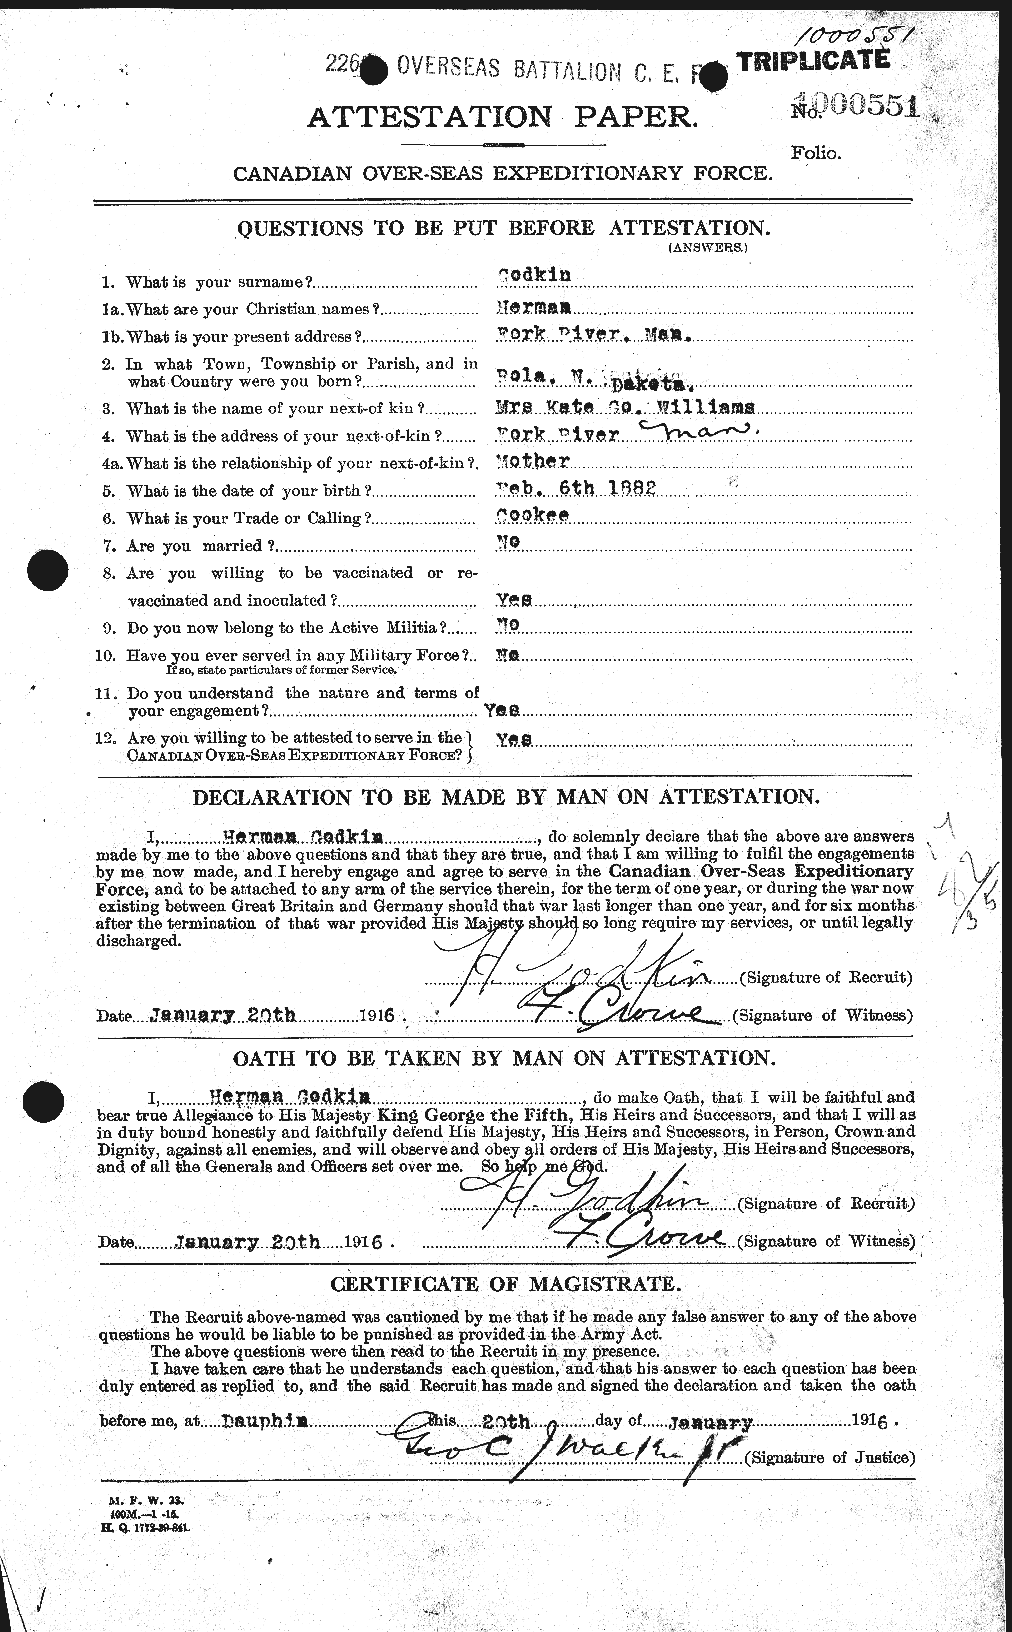 Personnel Records of the First World War - CEF 354590a